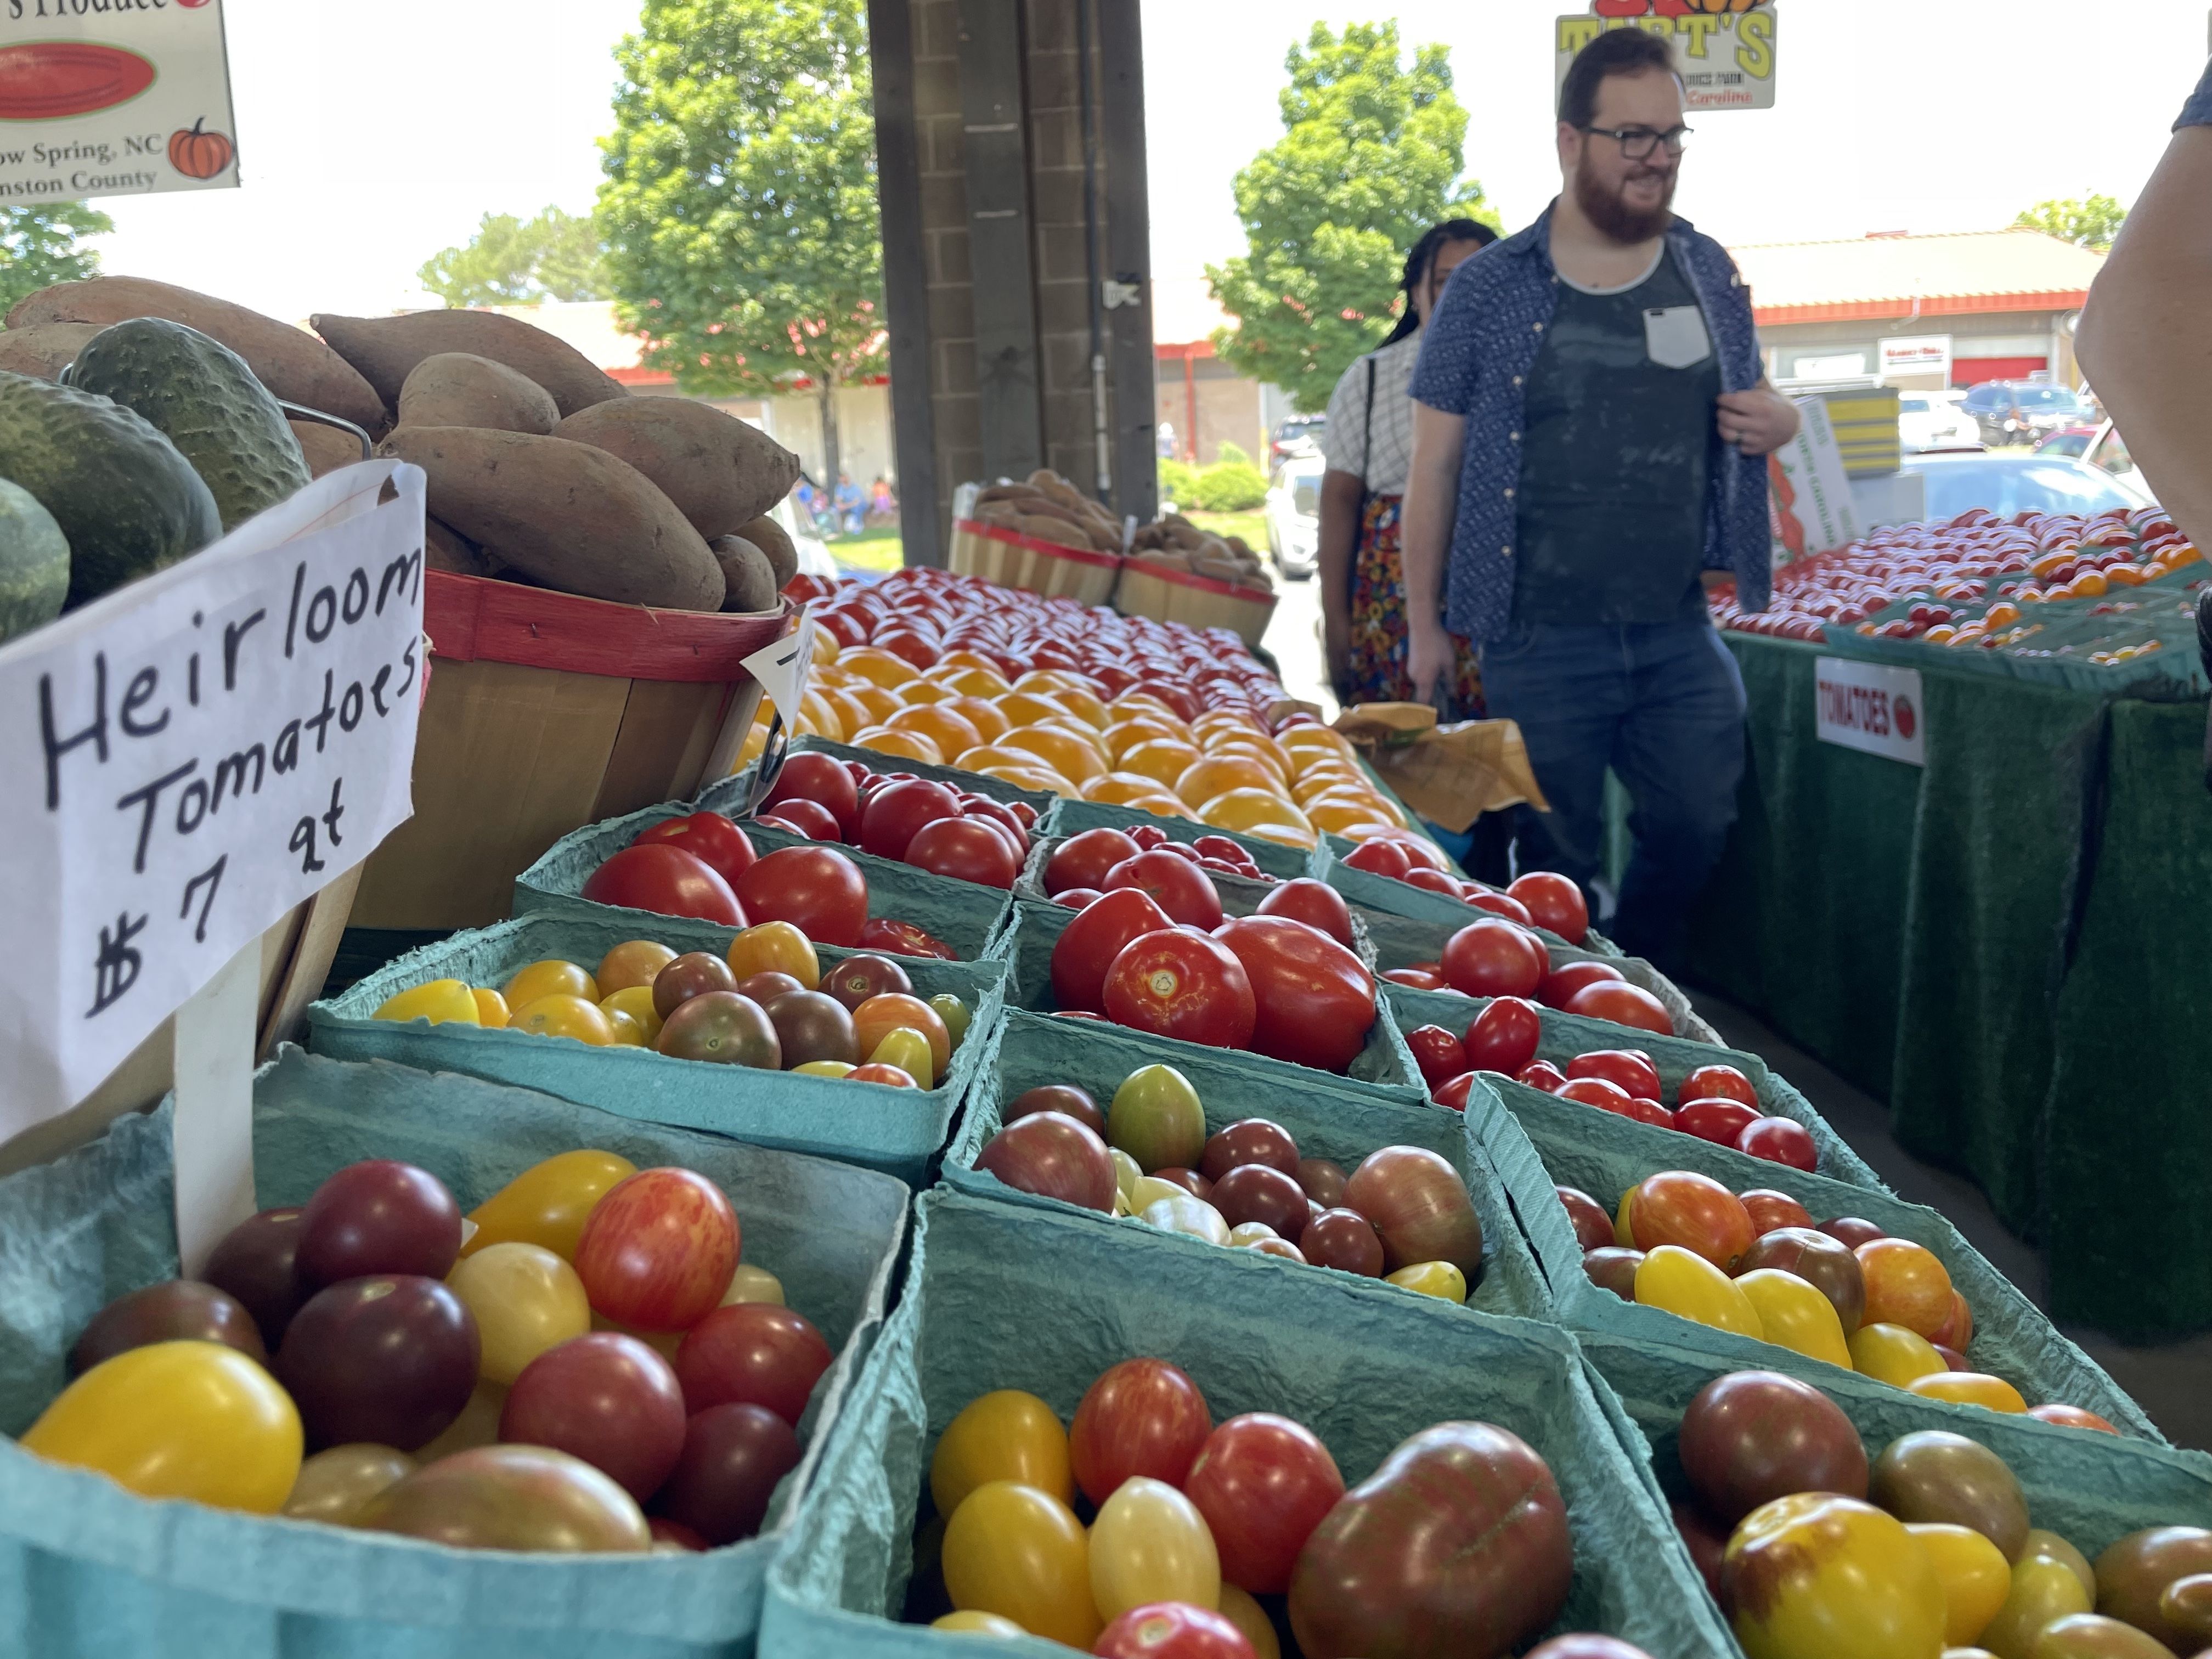 Heirloom tomatoes at the State Farmers Market